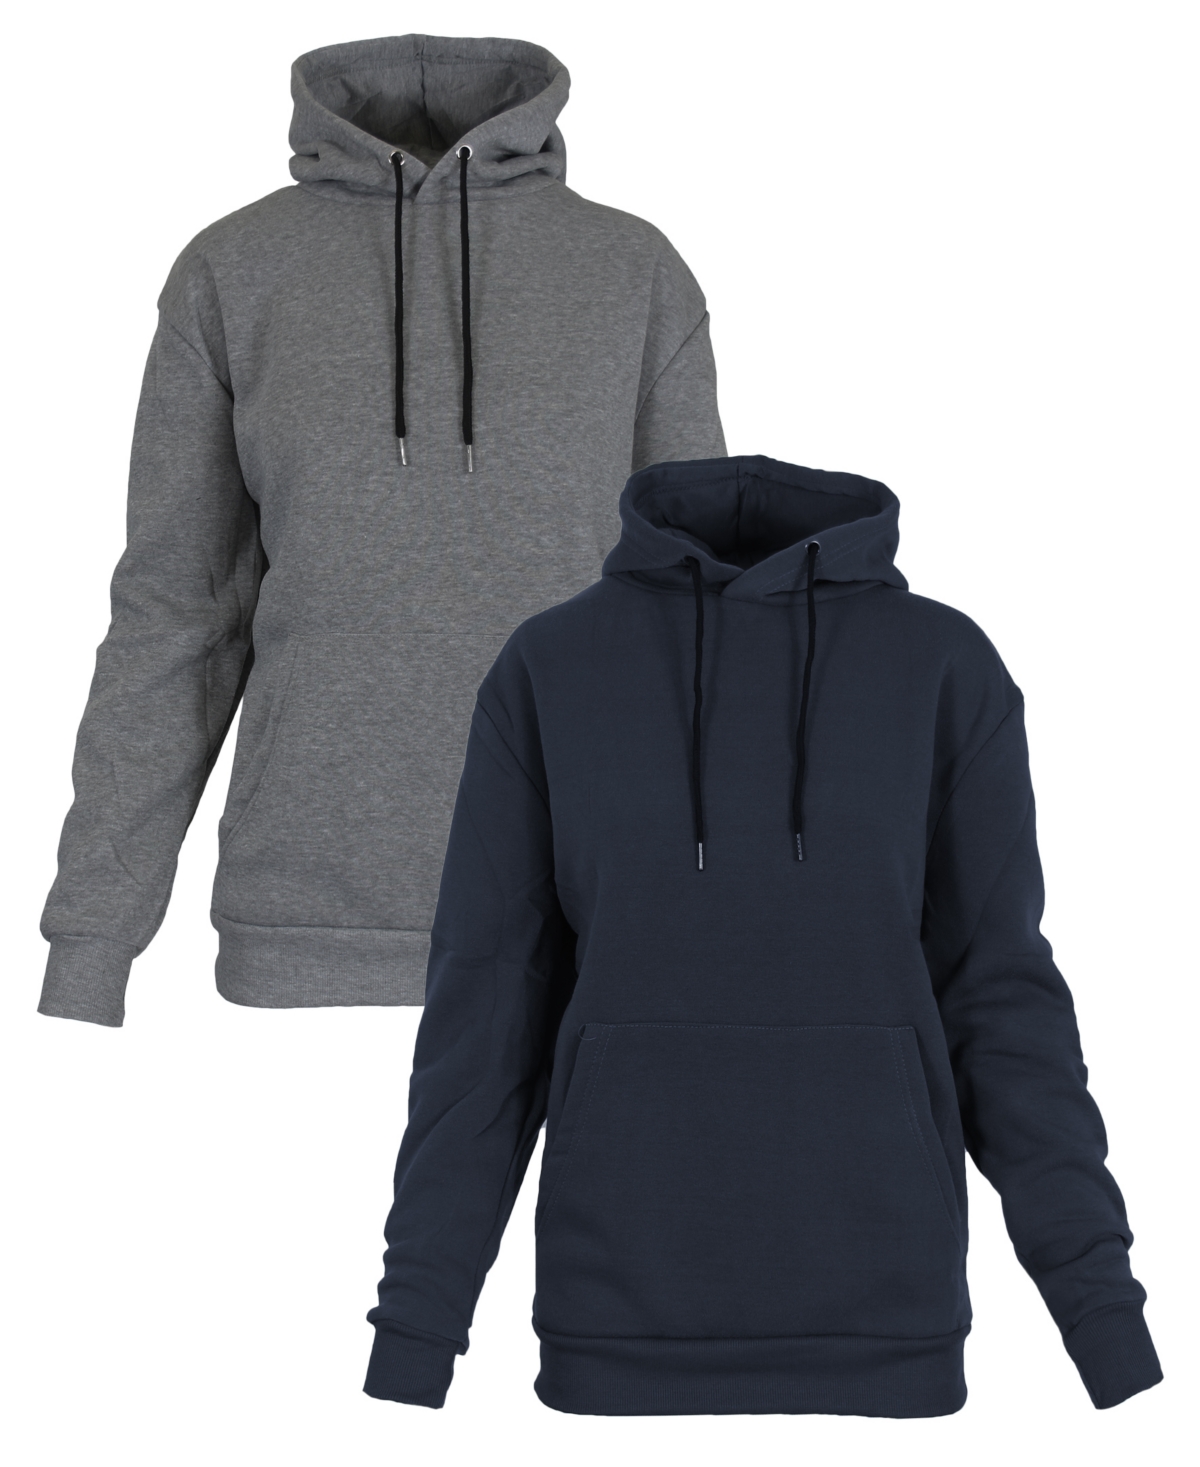 Galaxy By Harvic Women's Heavyweight Loose Fit Fleece Lined Pullover Hoodie Set, 2 Piece In Black-heather Gray